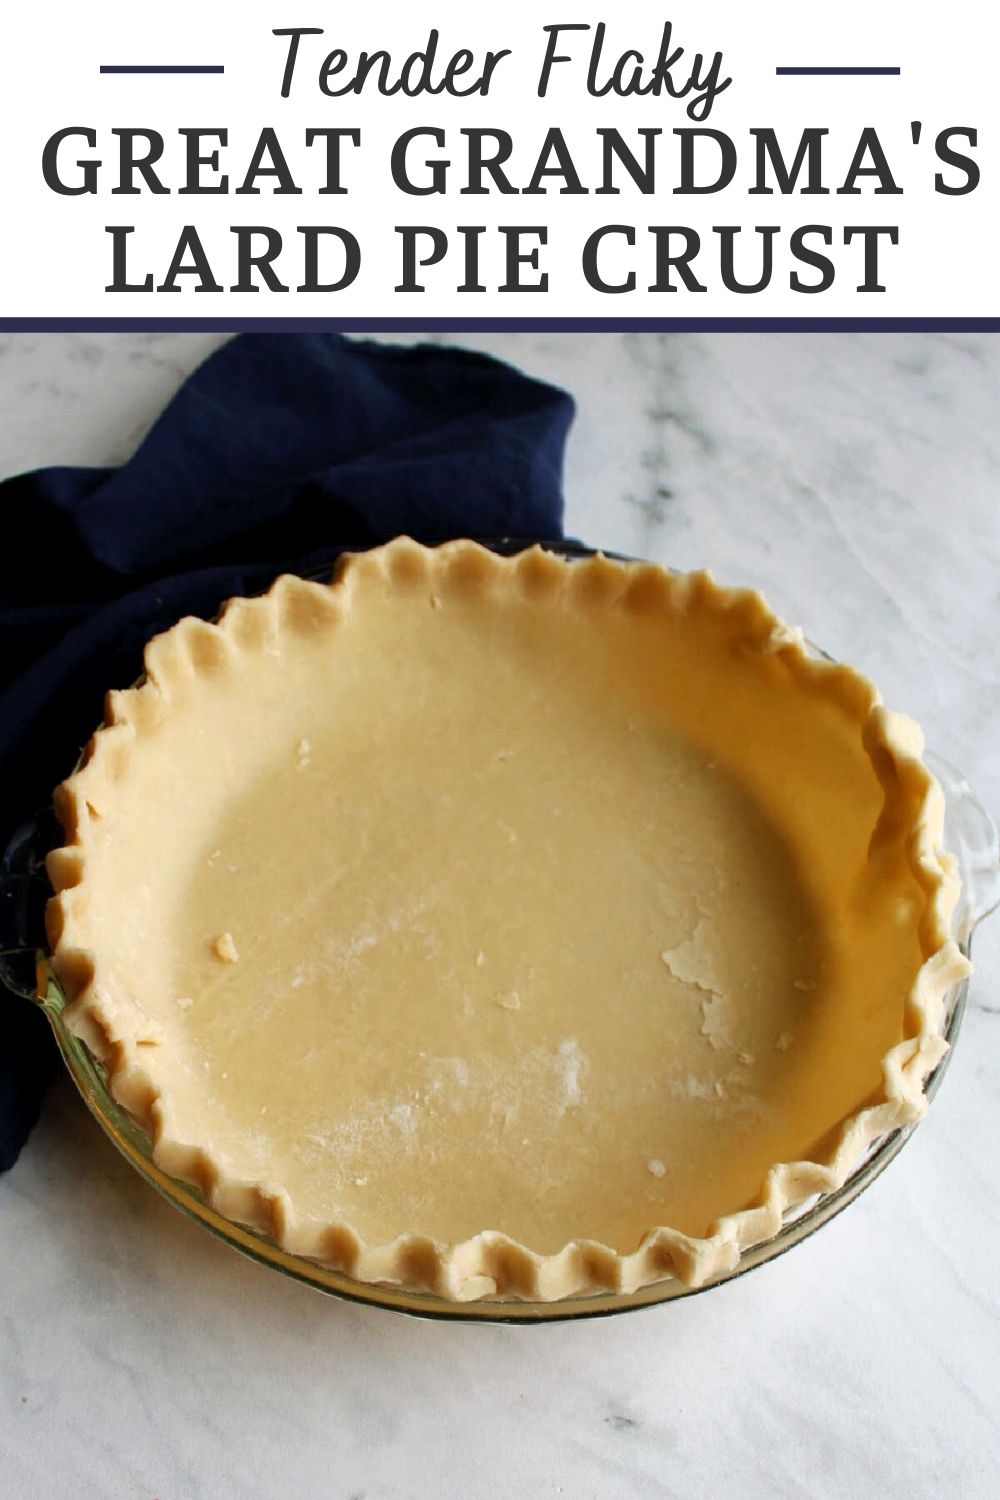 This tender flaky lard pie crust recipe is straight from my great grandma's recipe box. It practically melts in your mouth.